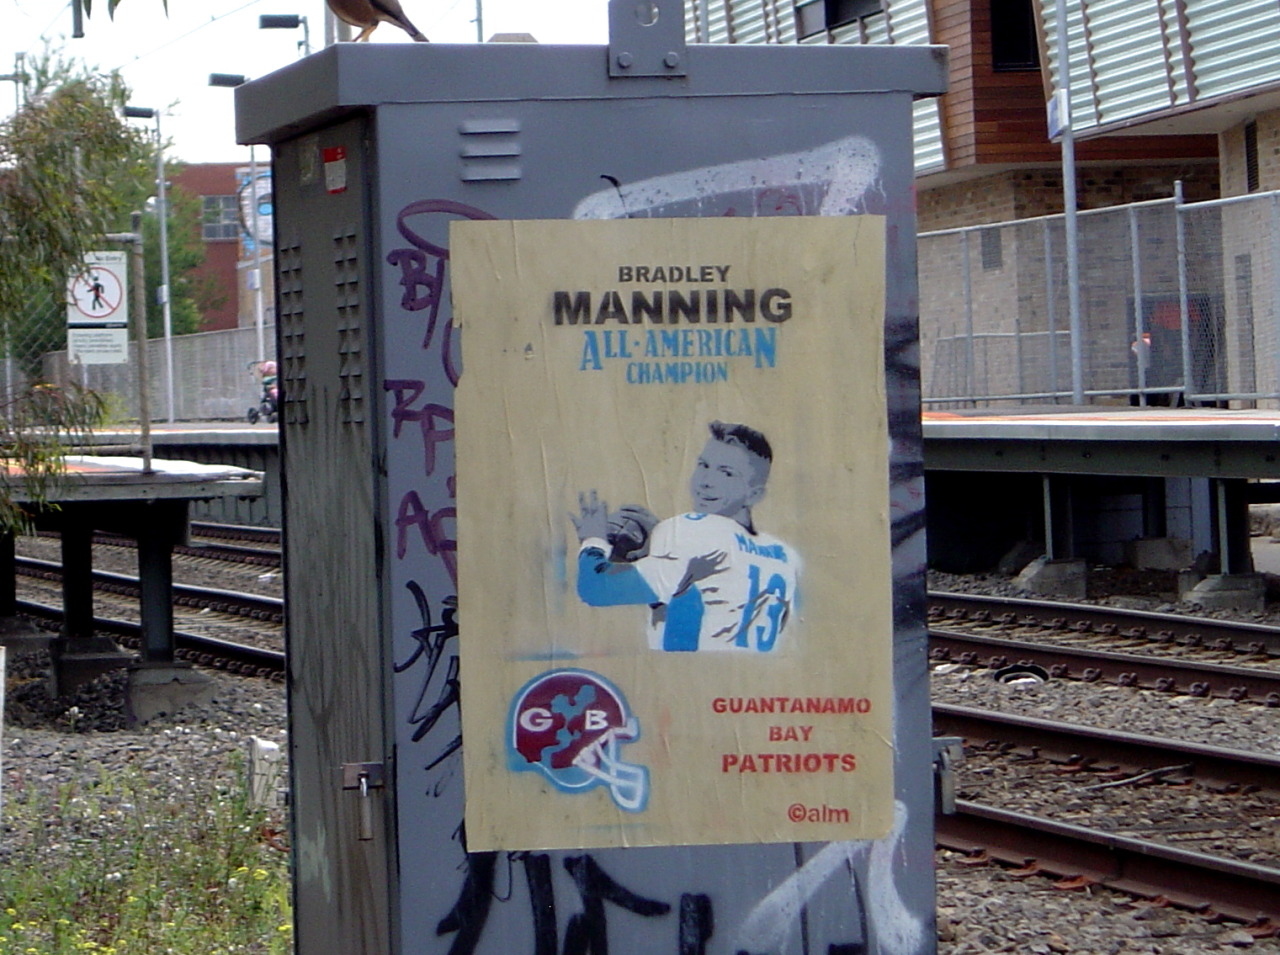 Chelsea Manning by Calm in Melbourne, Australia. Photo by Black Mark.